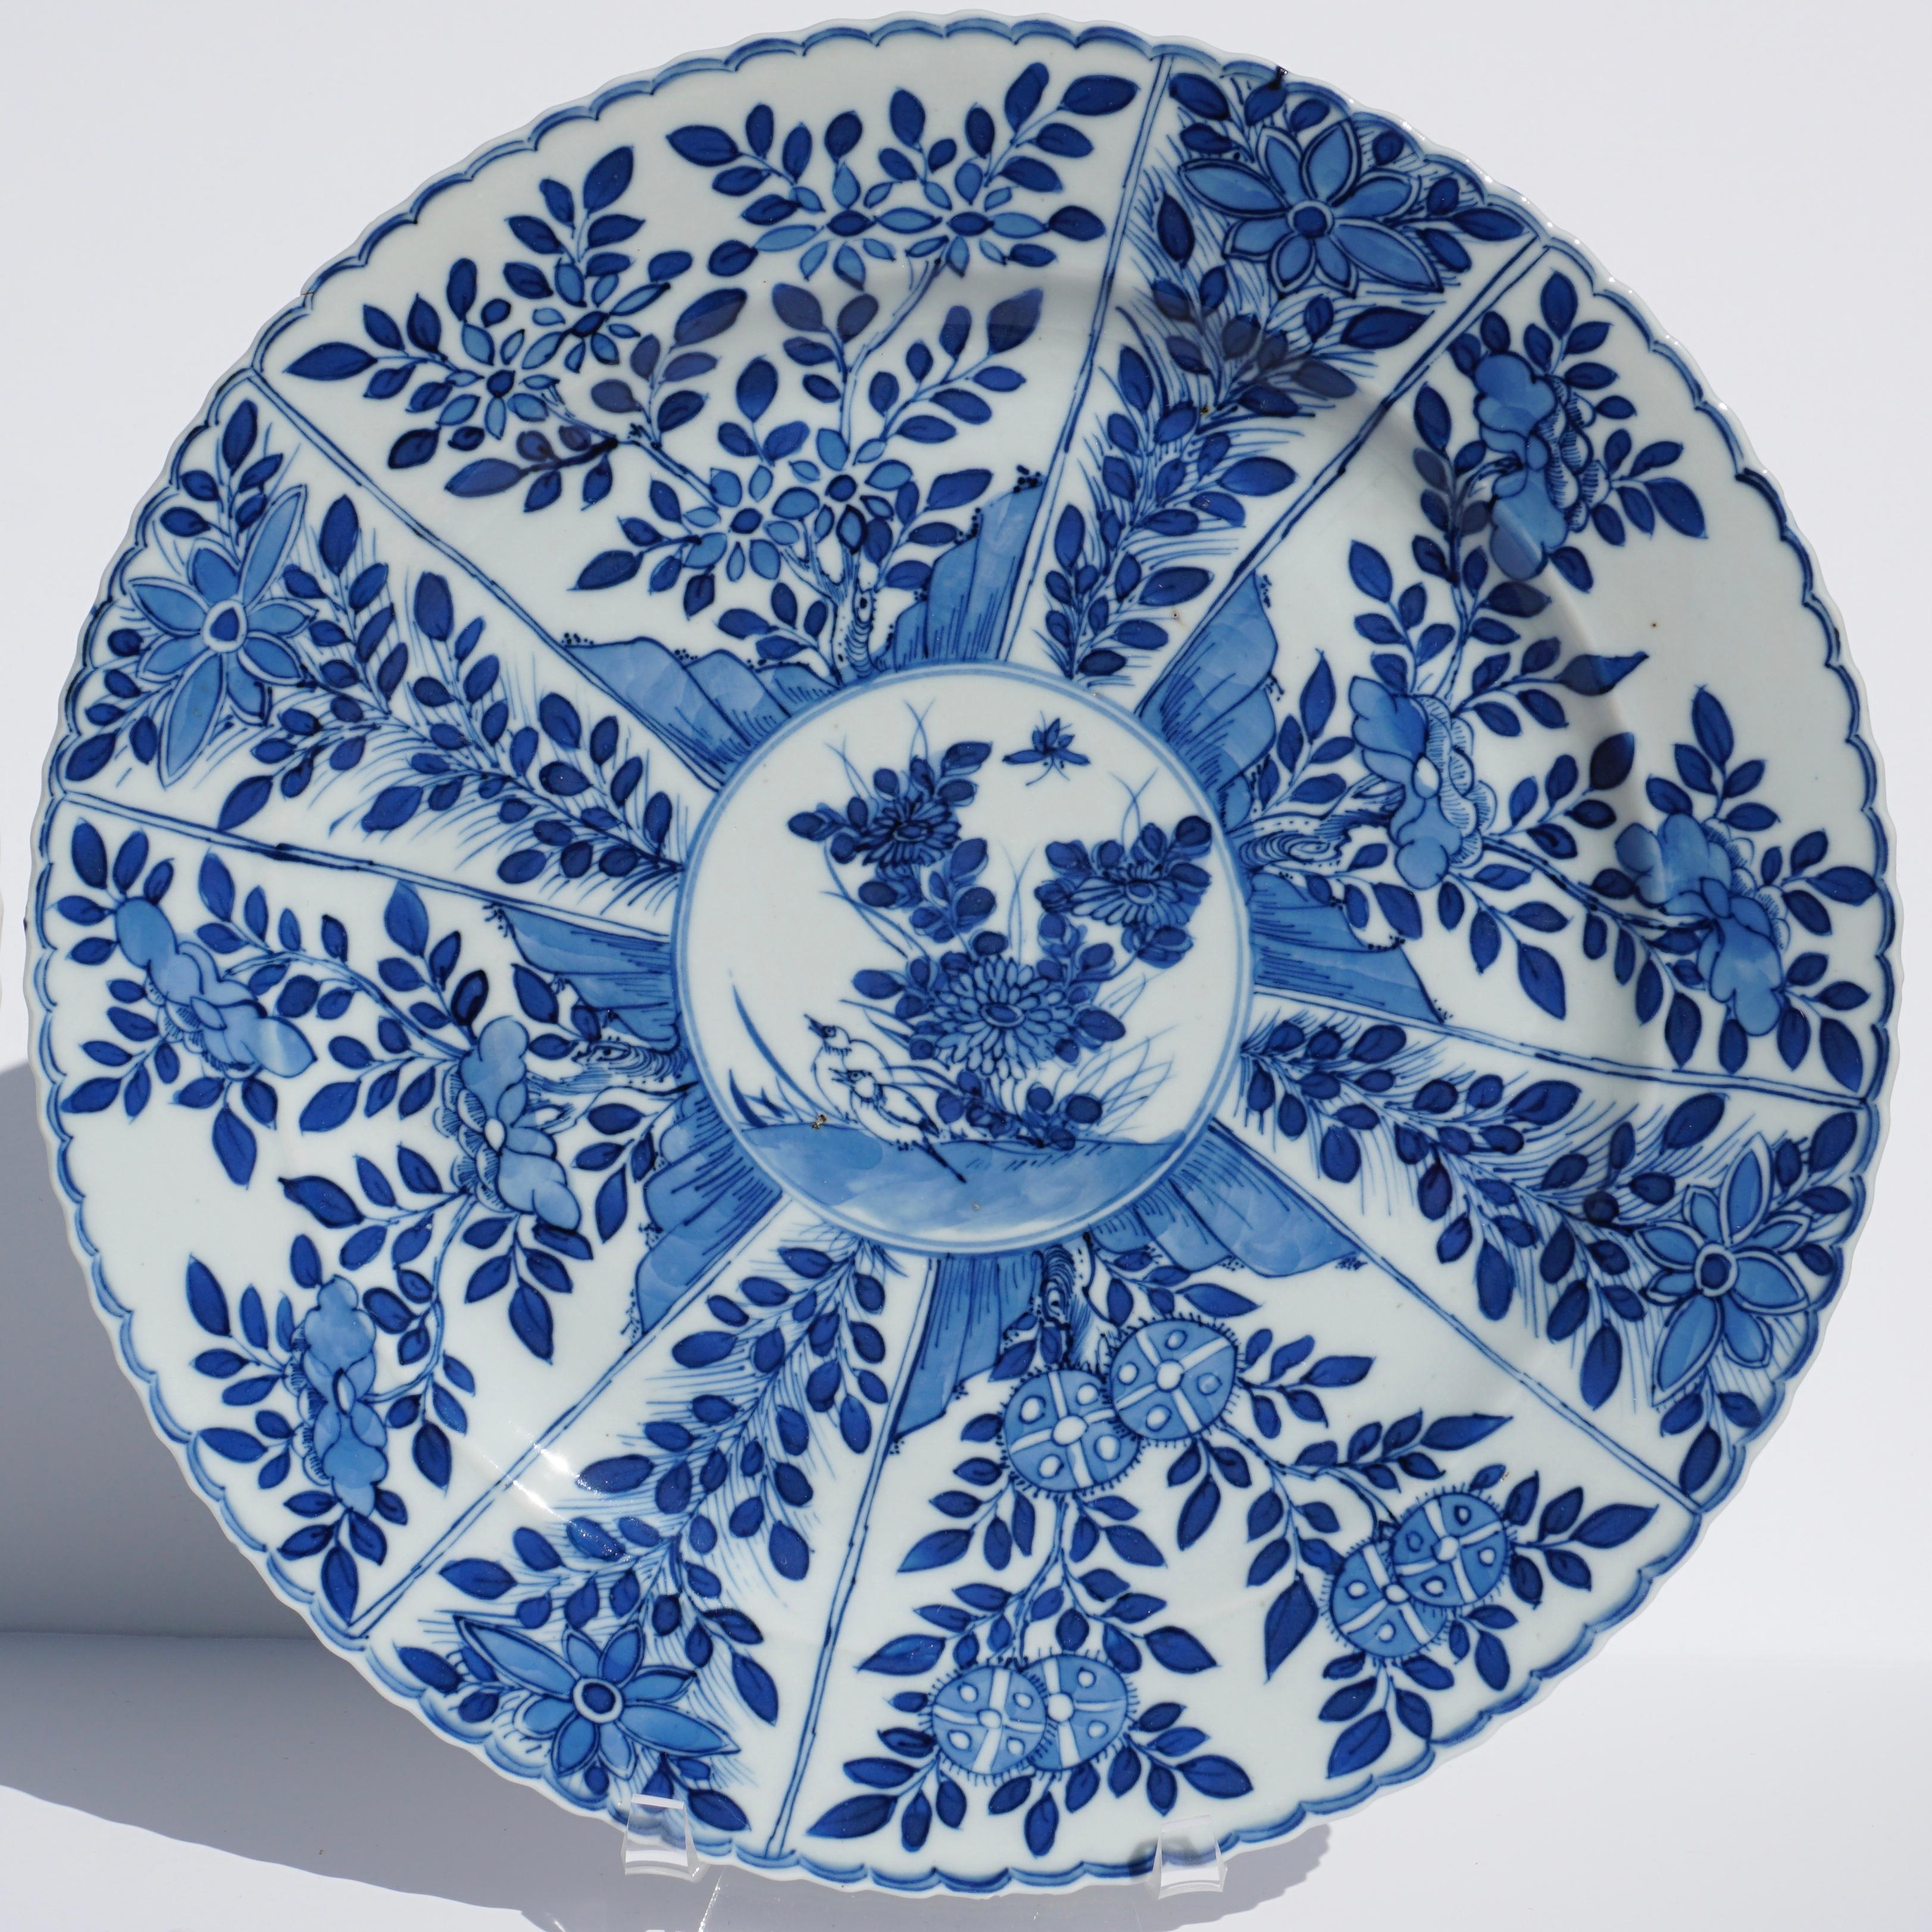 Here is a set of beautiful blue and white hand painted Chinese porcelain plates dating to the last half of the 18th century, circa 1780, Qing dynasty. The plates are beautifully potted, and have been hand decorated in a lovely free flowing manner in